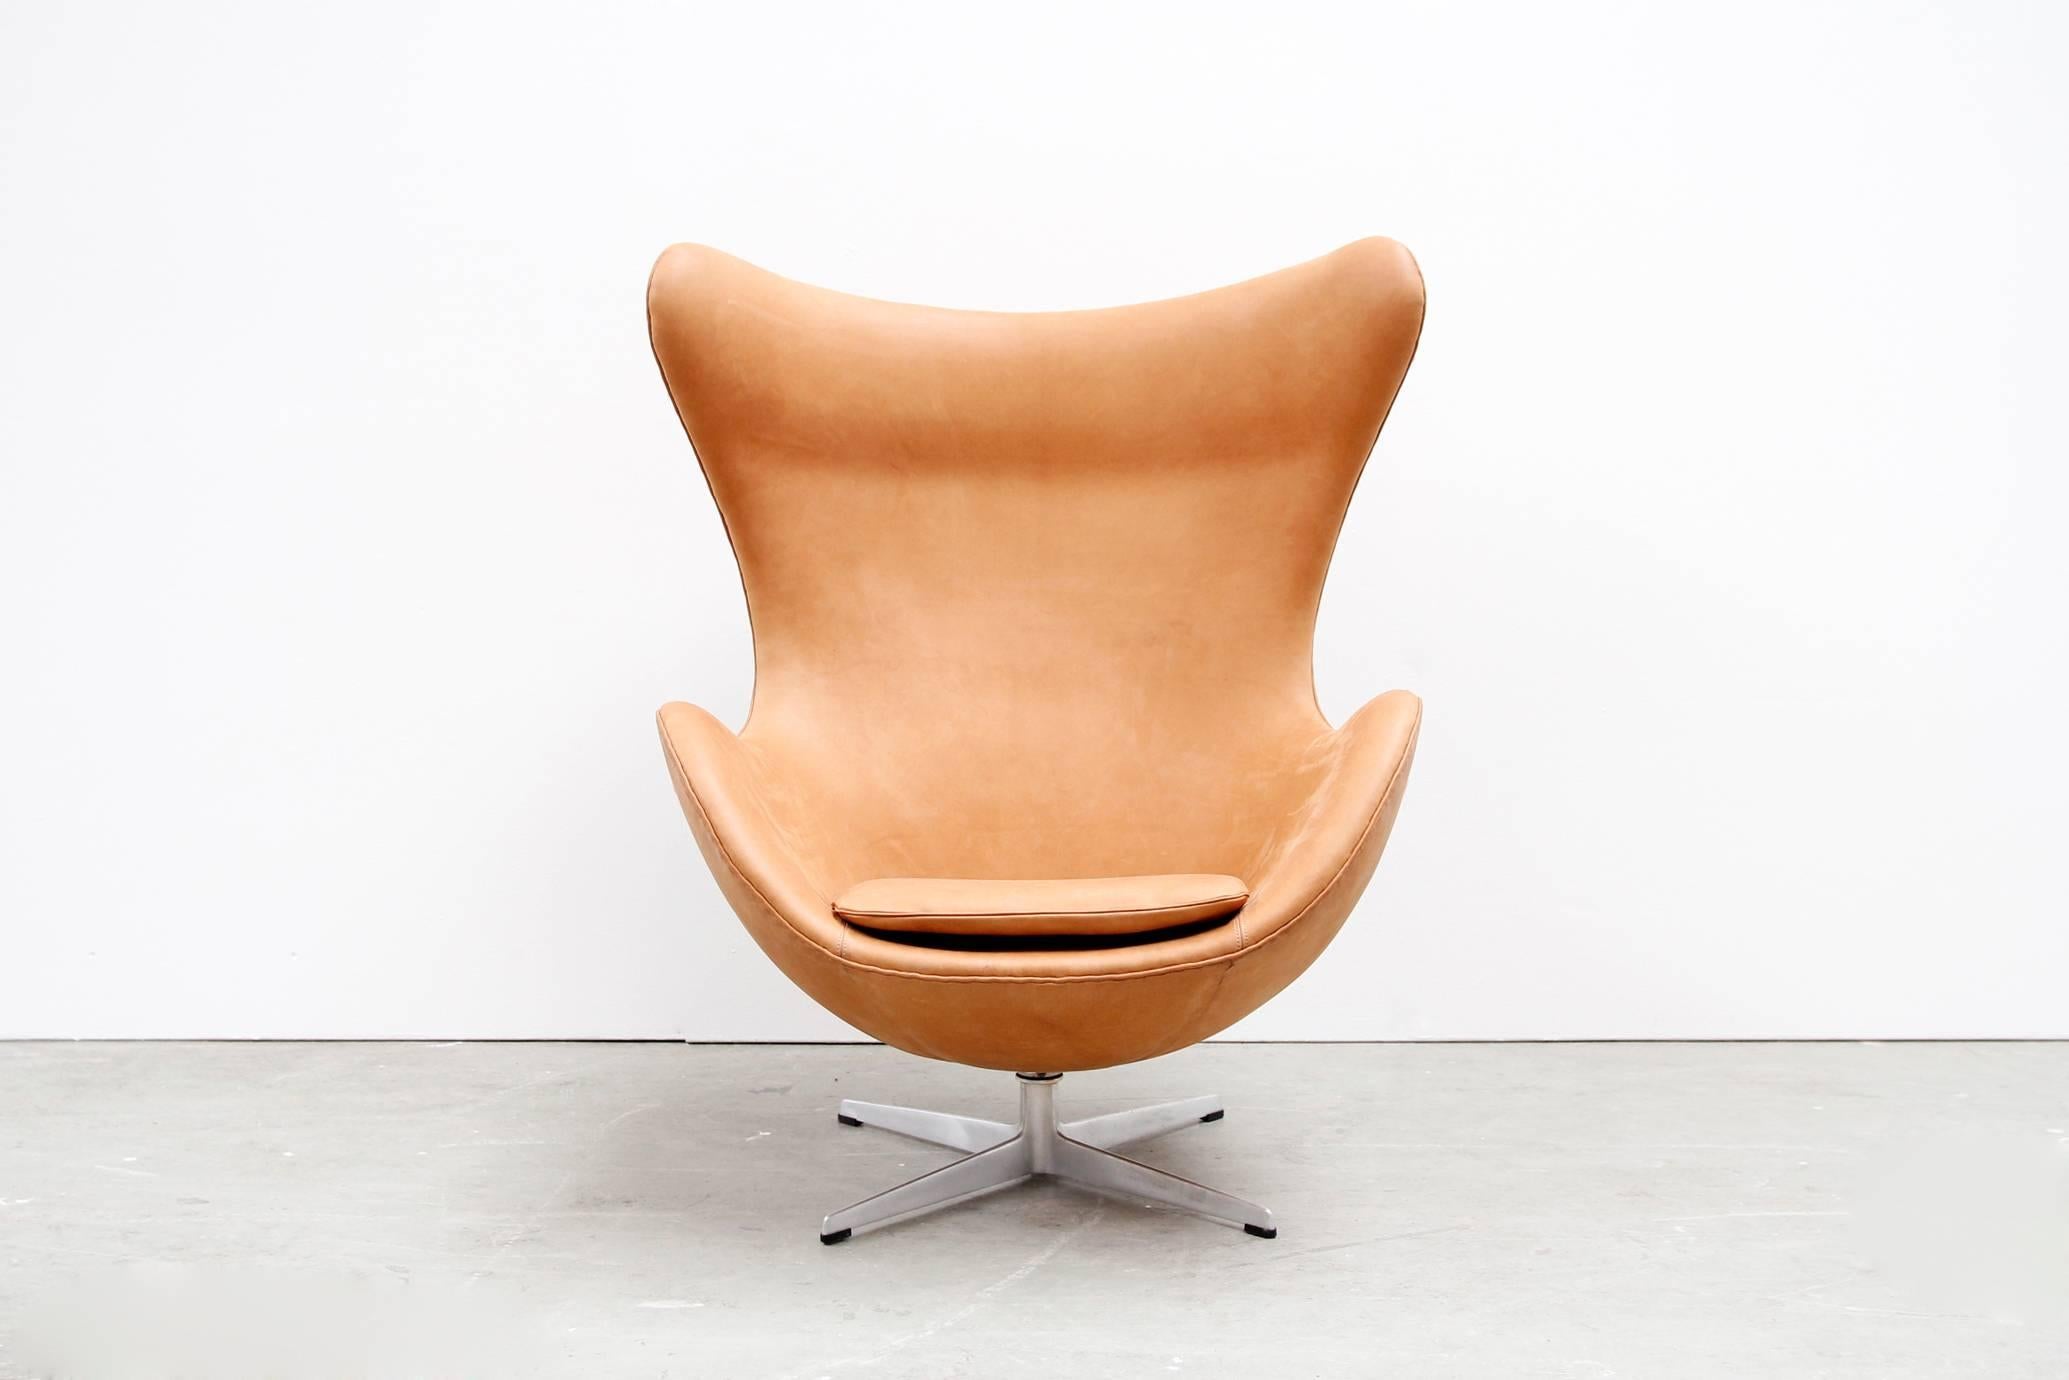 A real showpiece is this Arne Jacobsen Egg chair from 1966!
This model is specially designed for the Royal SAS Hotel in Copenhagen in 1958, and since all the lines of this building were so incredibly straight, Arne Jacobsen has designed this